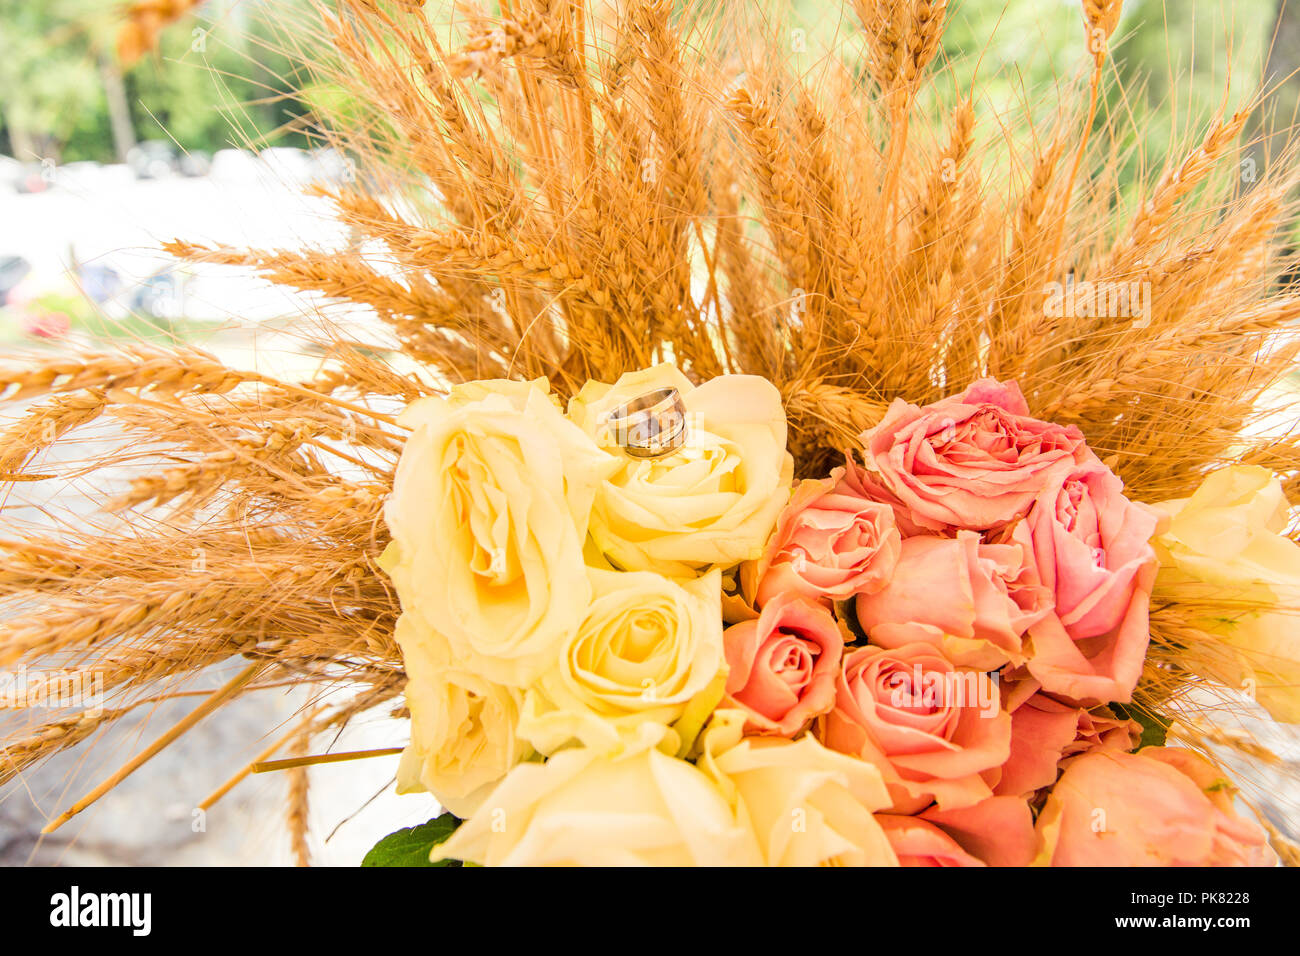 Wedding Rings on Roses Bouquet and Wheat Ears Stock Photo